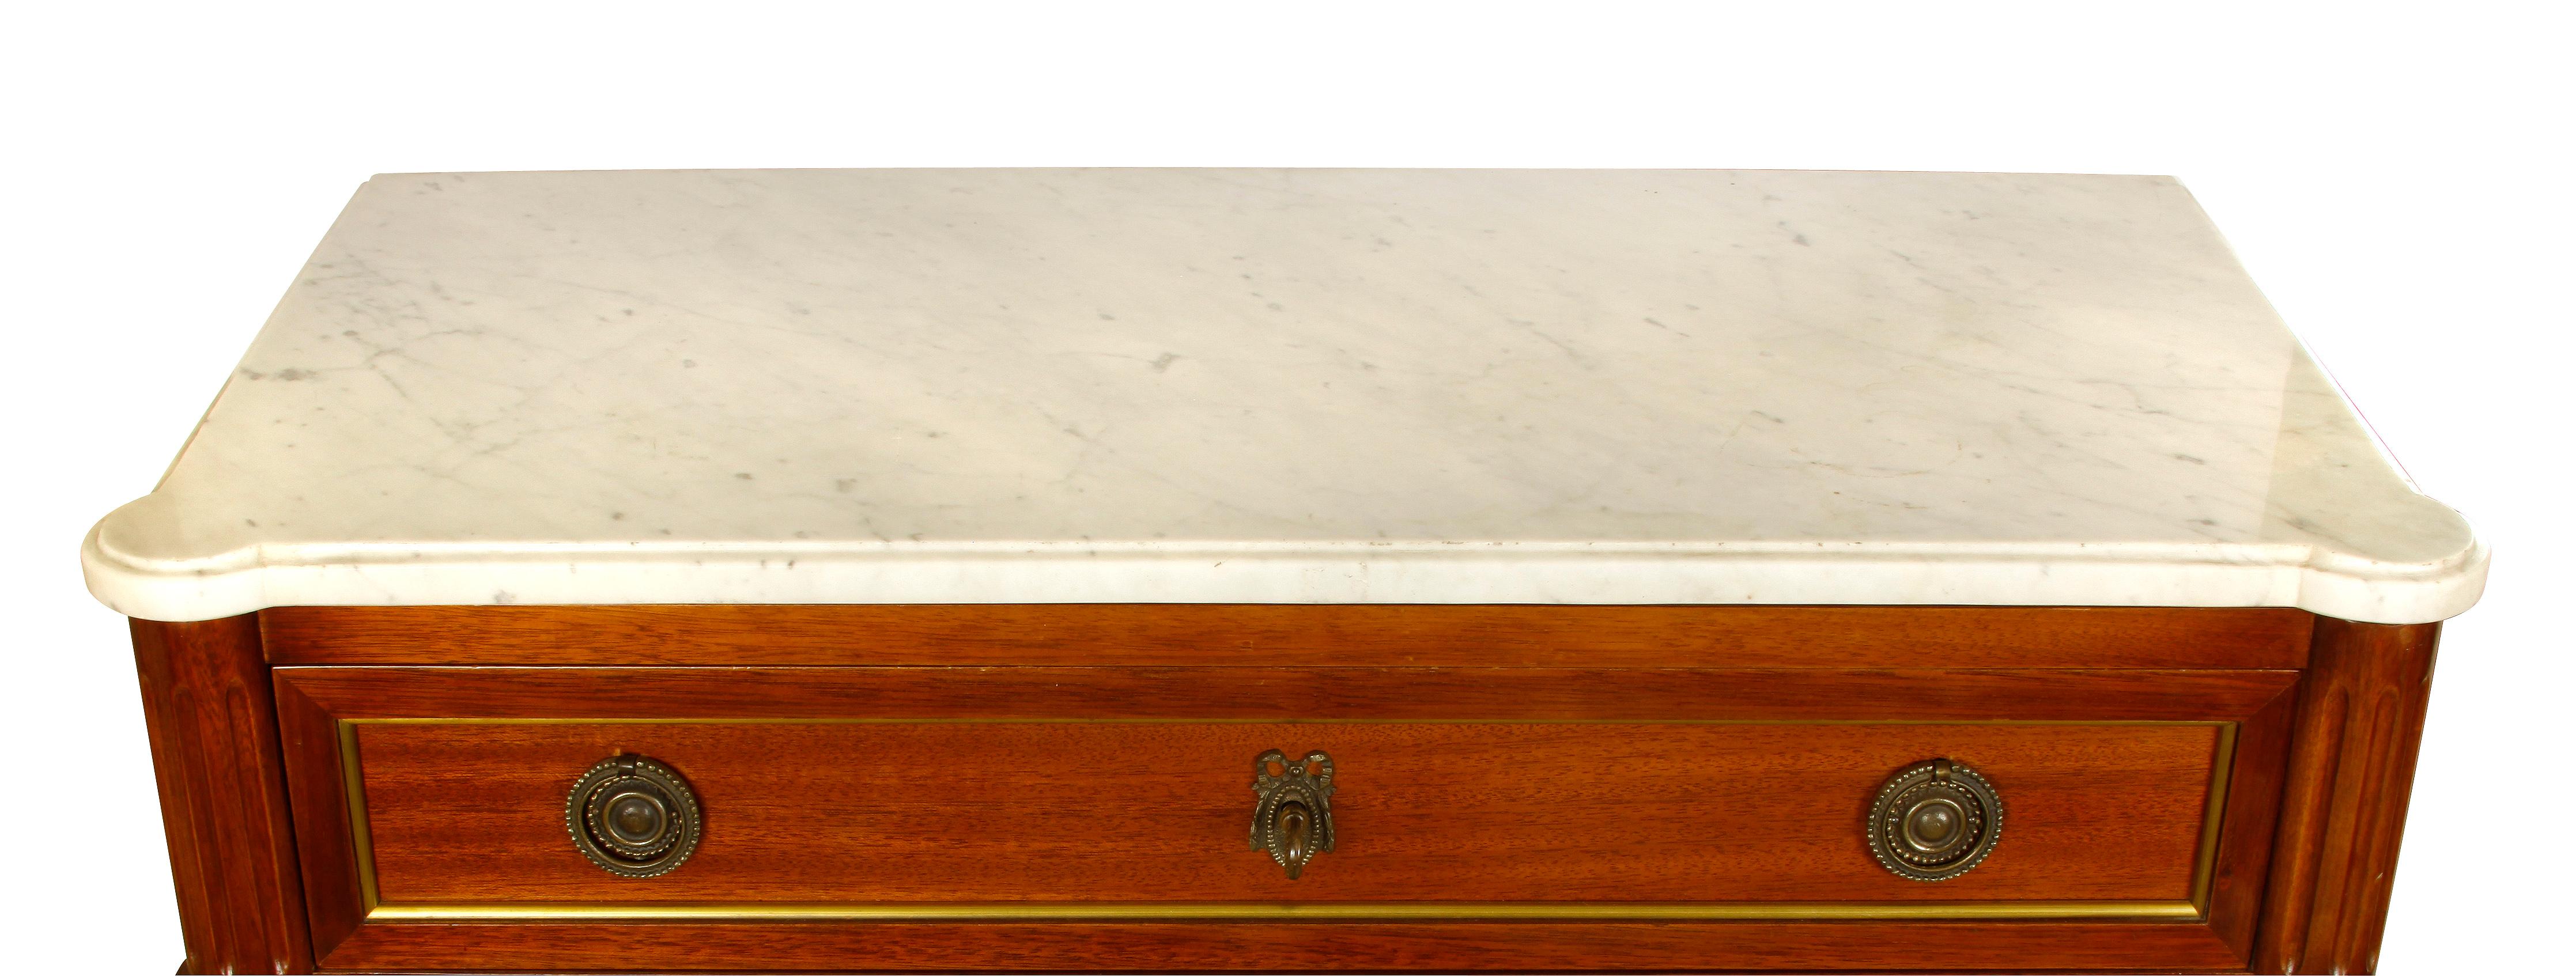 English Louis XVI Style Marble Top Semanier with Brass Fittings For Sale